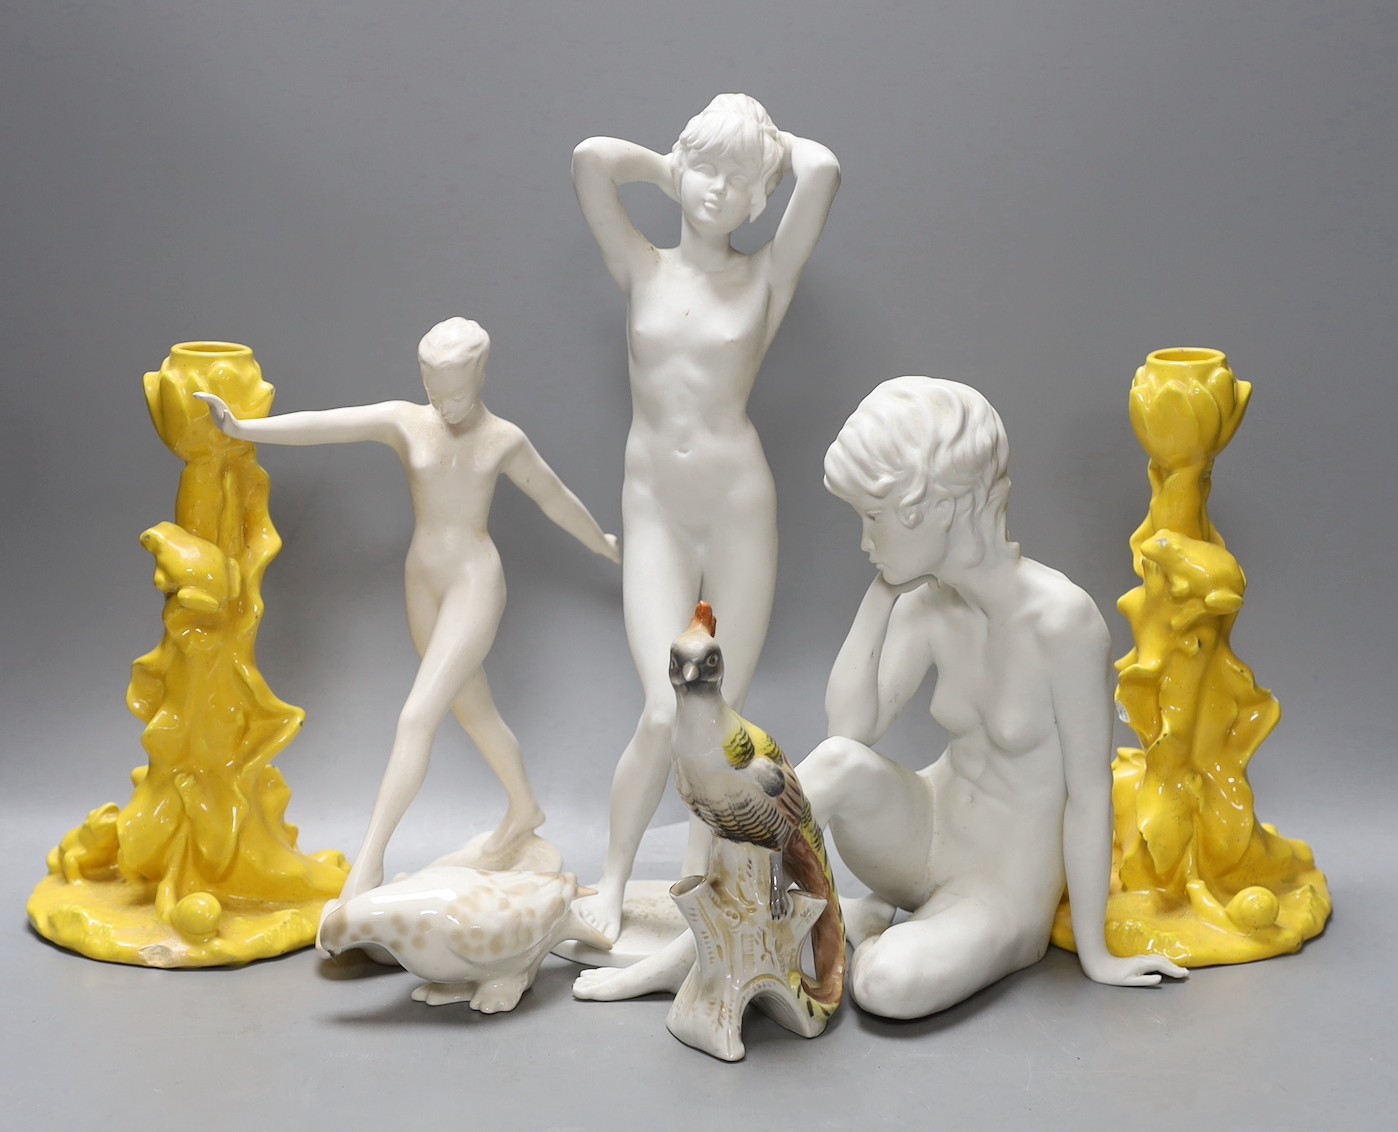 Two Kaiser porcelain figures, a Goebel figure, a pair of yellow glazed candlesticks with frogs and